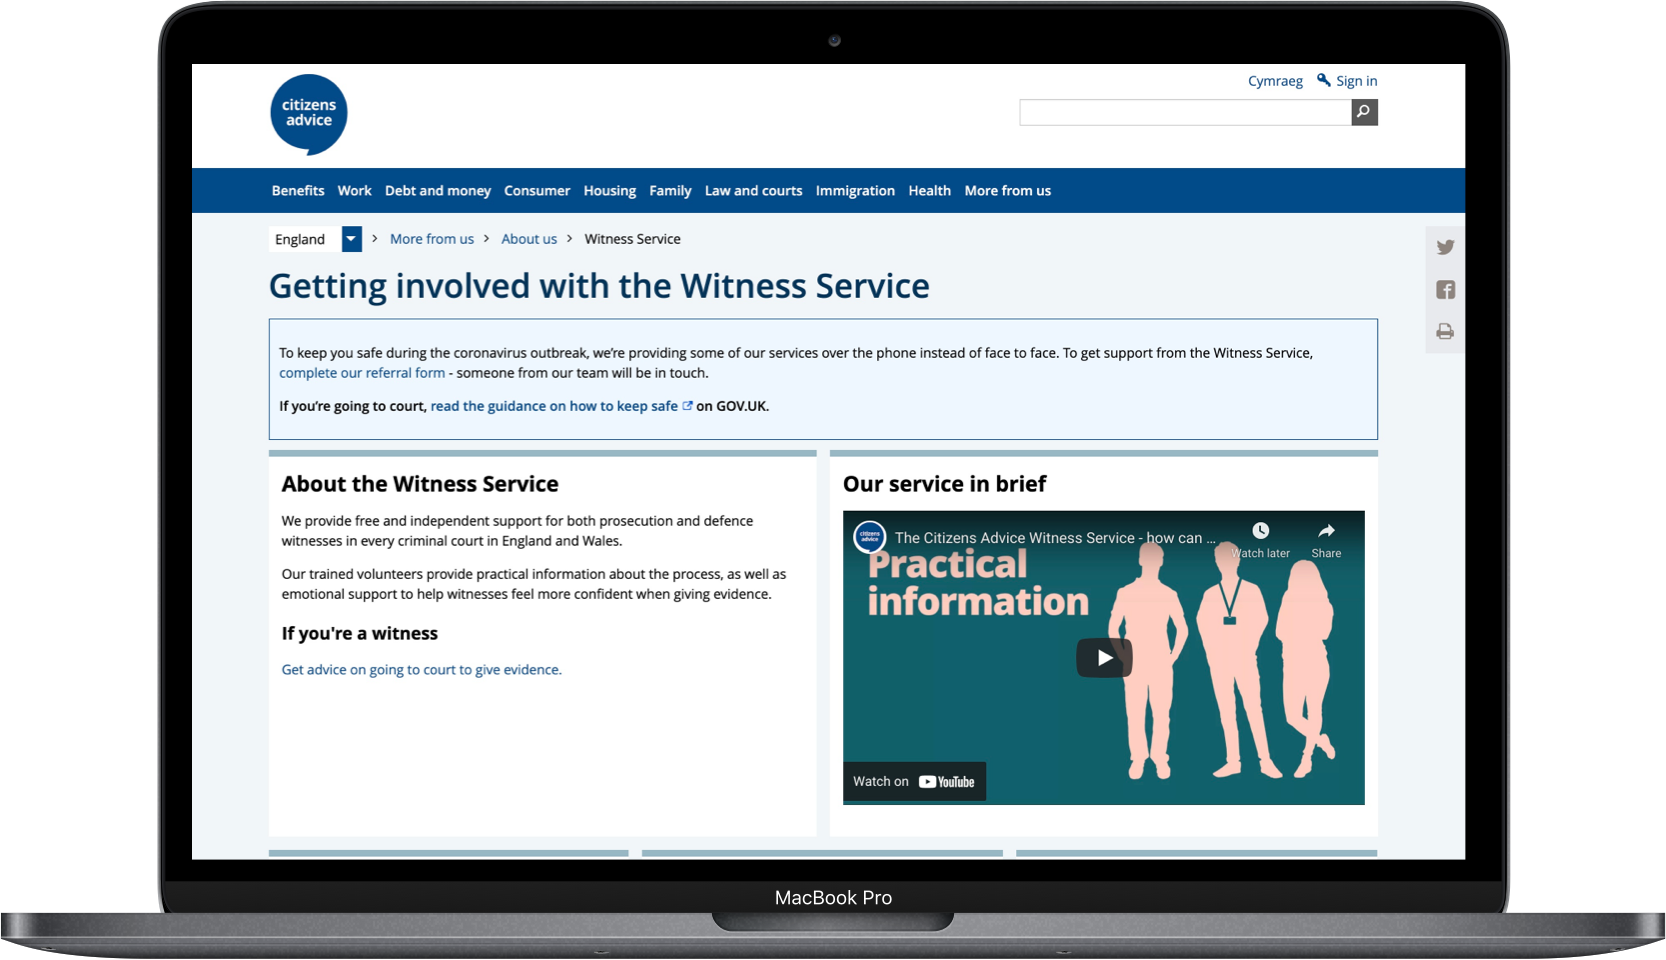 Photo showing the Citizen's Advice Witness Service webpage on a laptop